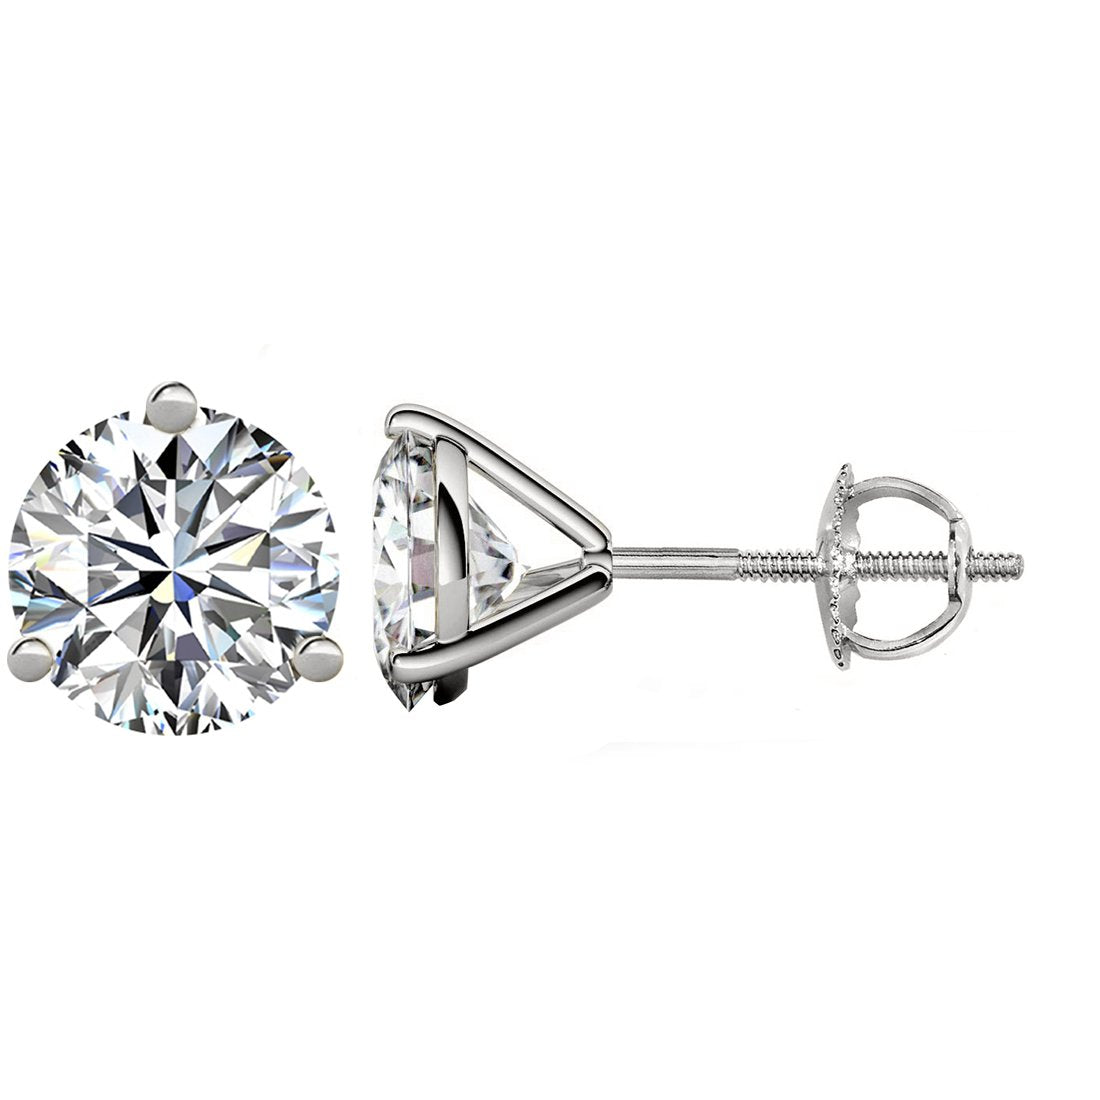 PLATINUM 950 3-PRONG ROUND. Choose From 0.25 CTW To 10.00 CTW